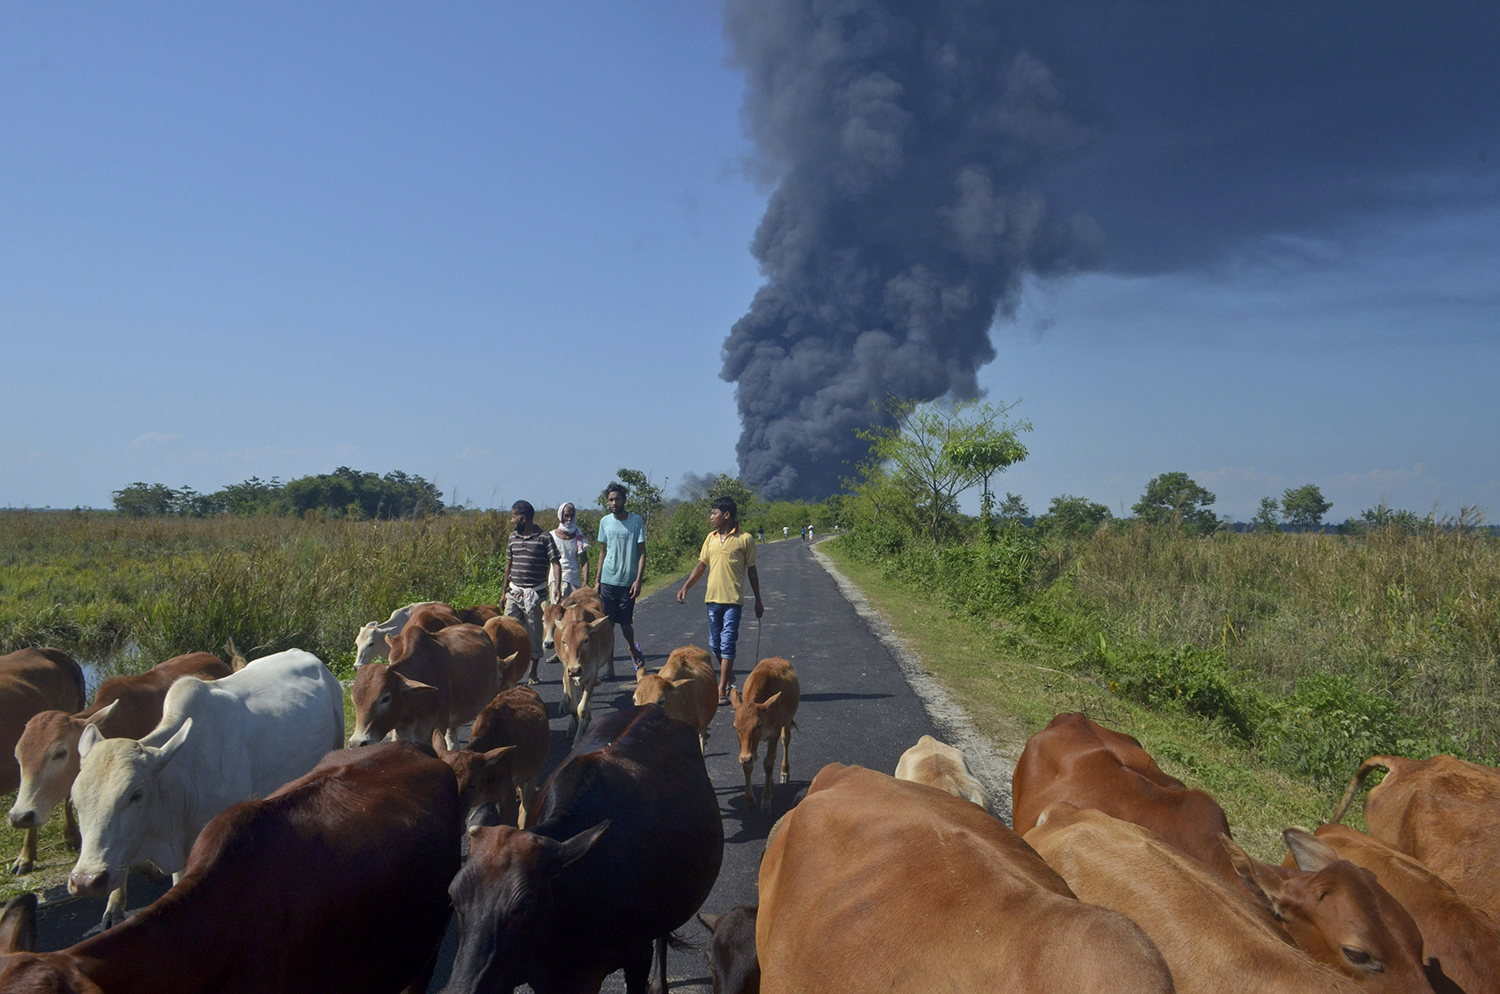 How Assam’s Baghjan gas well blowout impacted lives, livelihoods and the environment